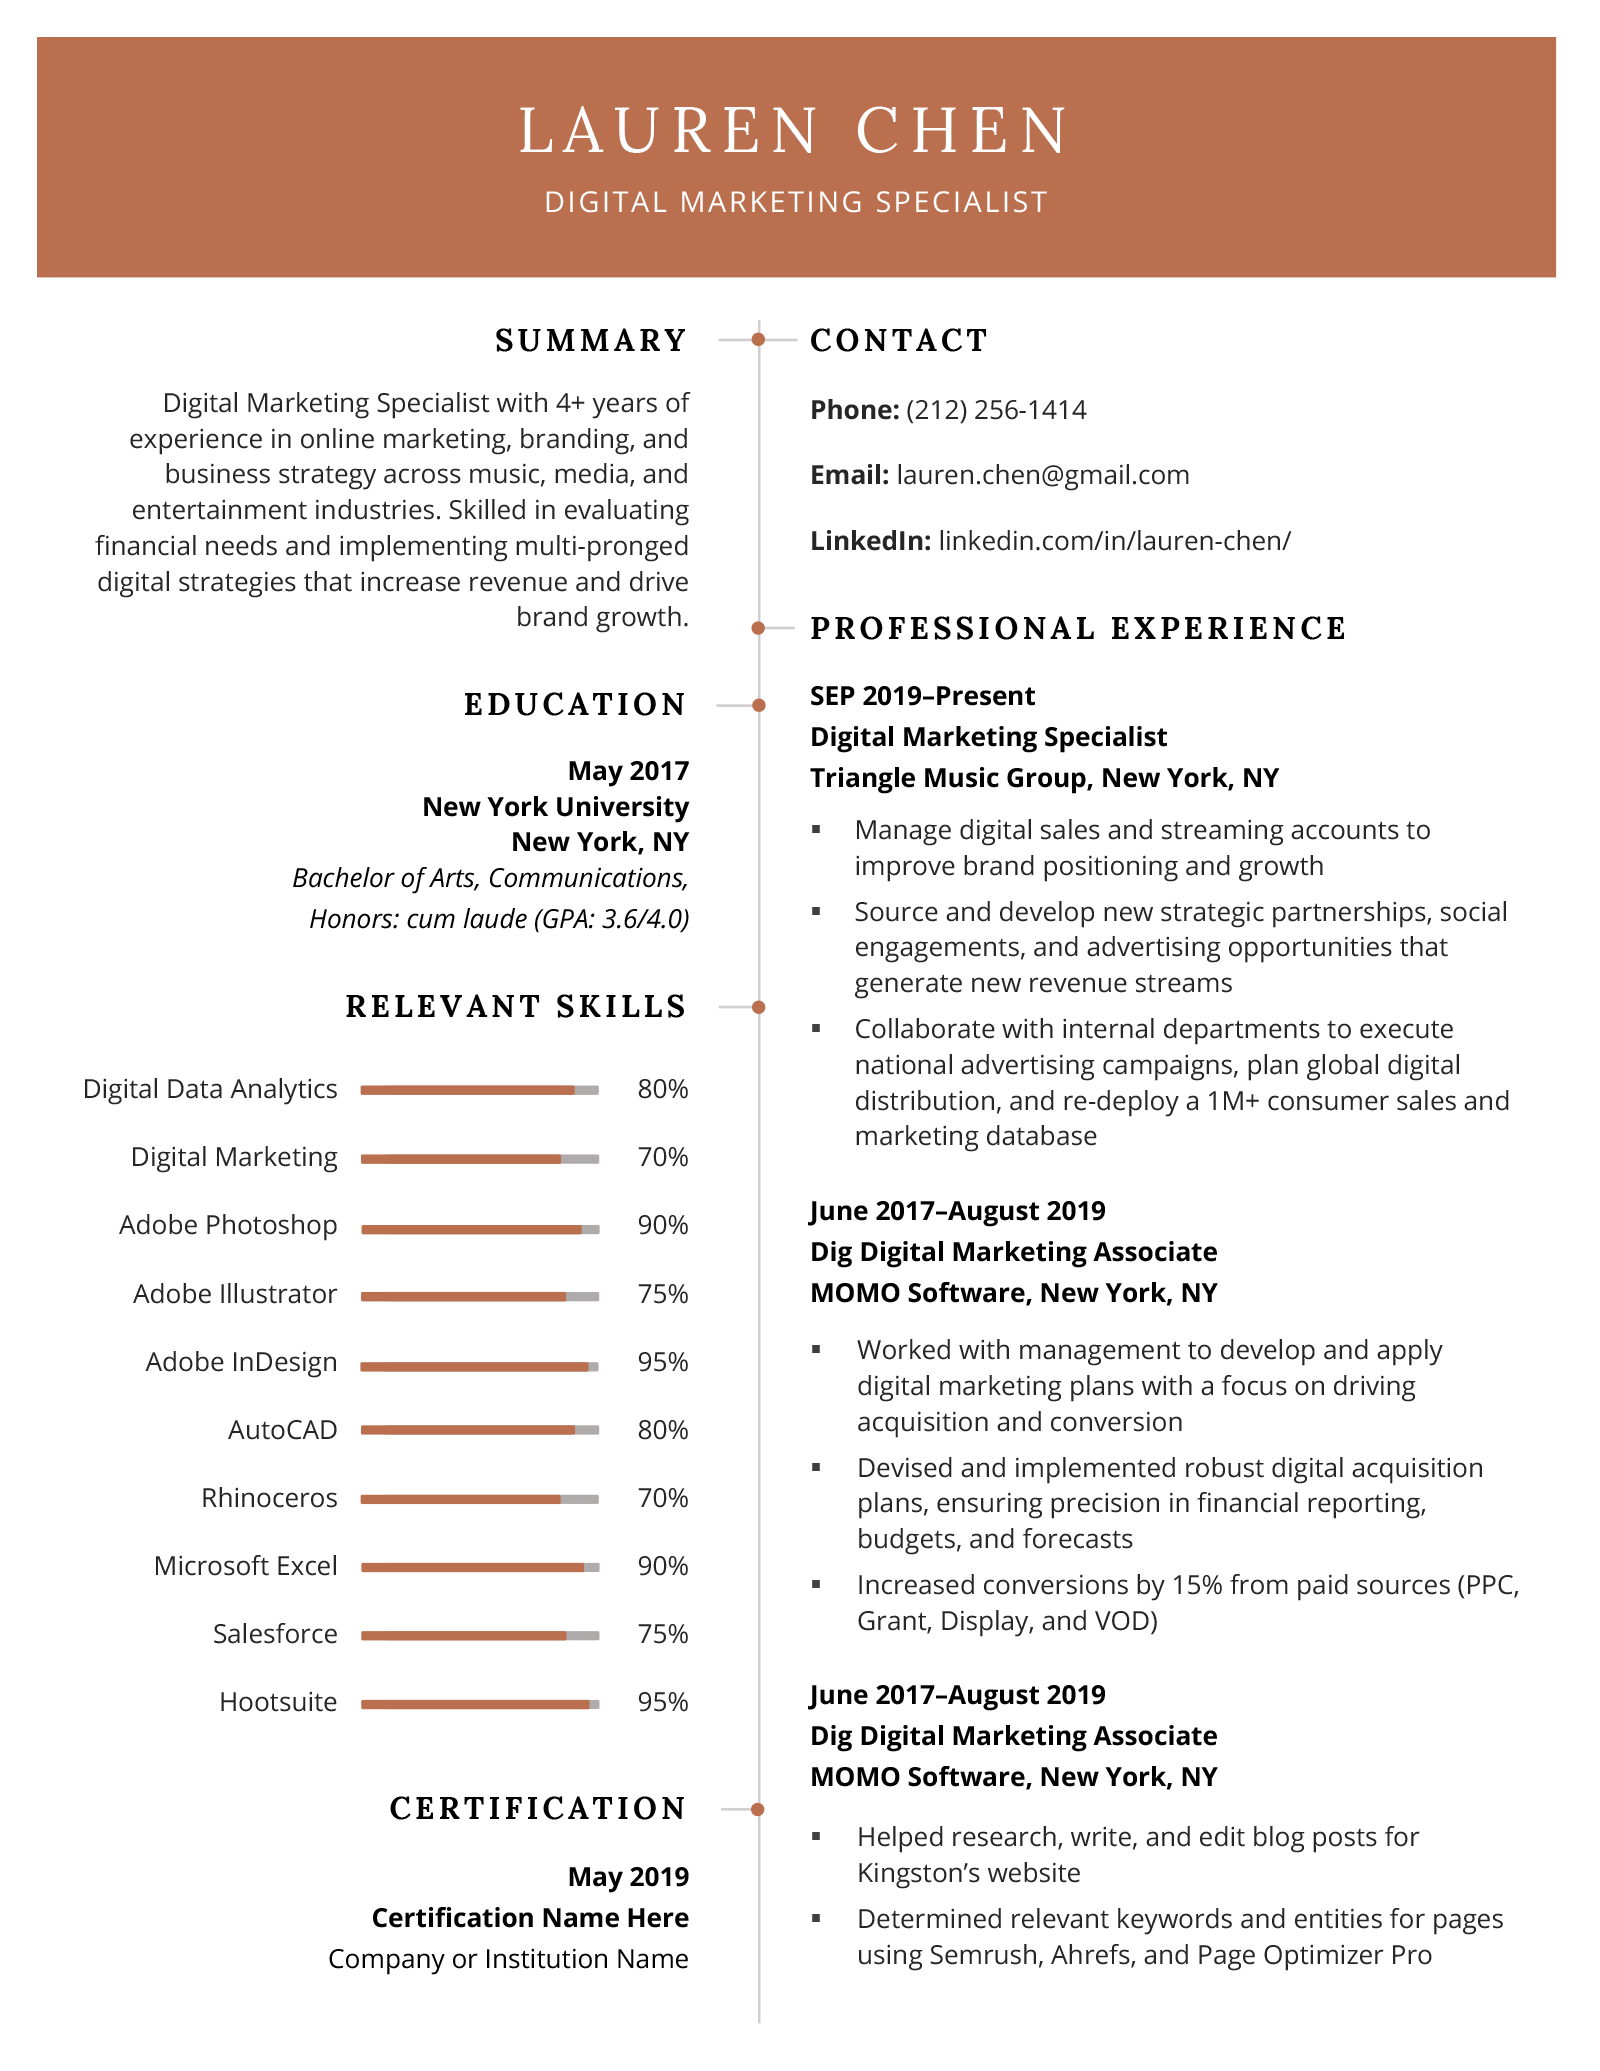 An example of a one page resume